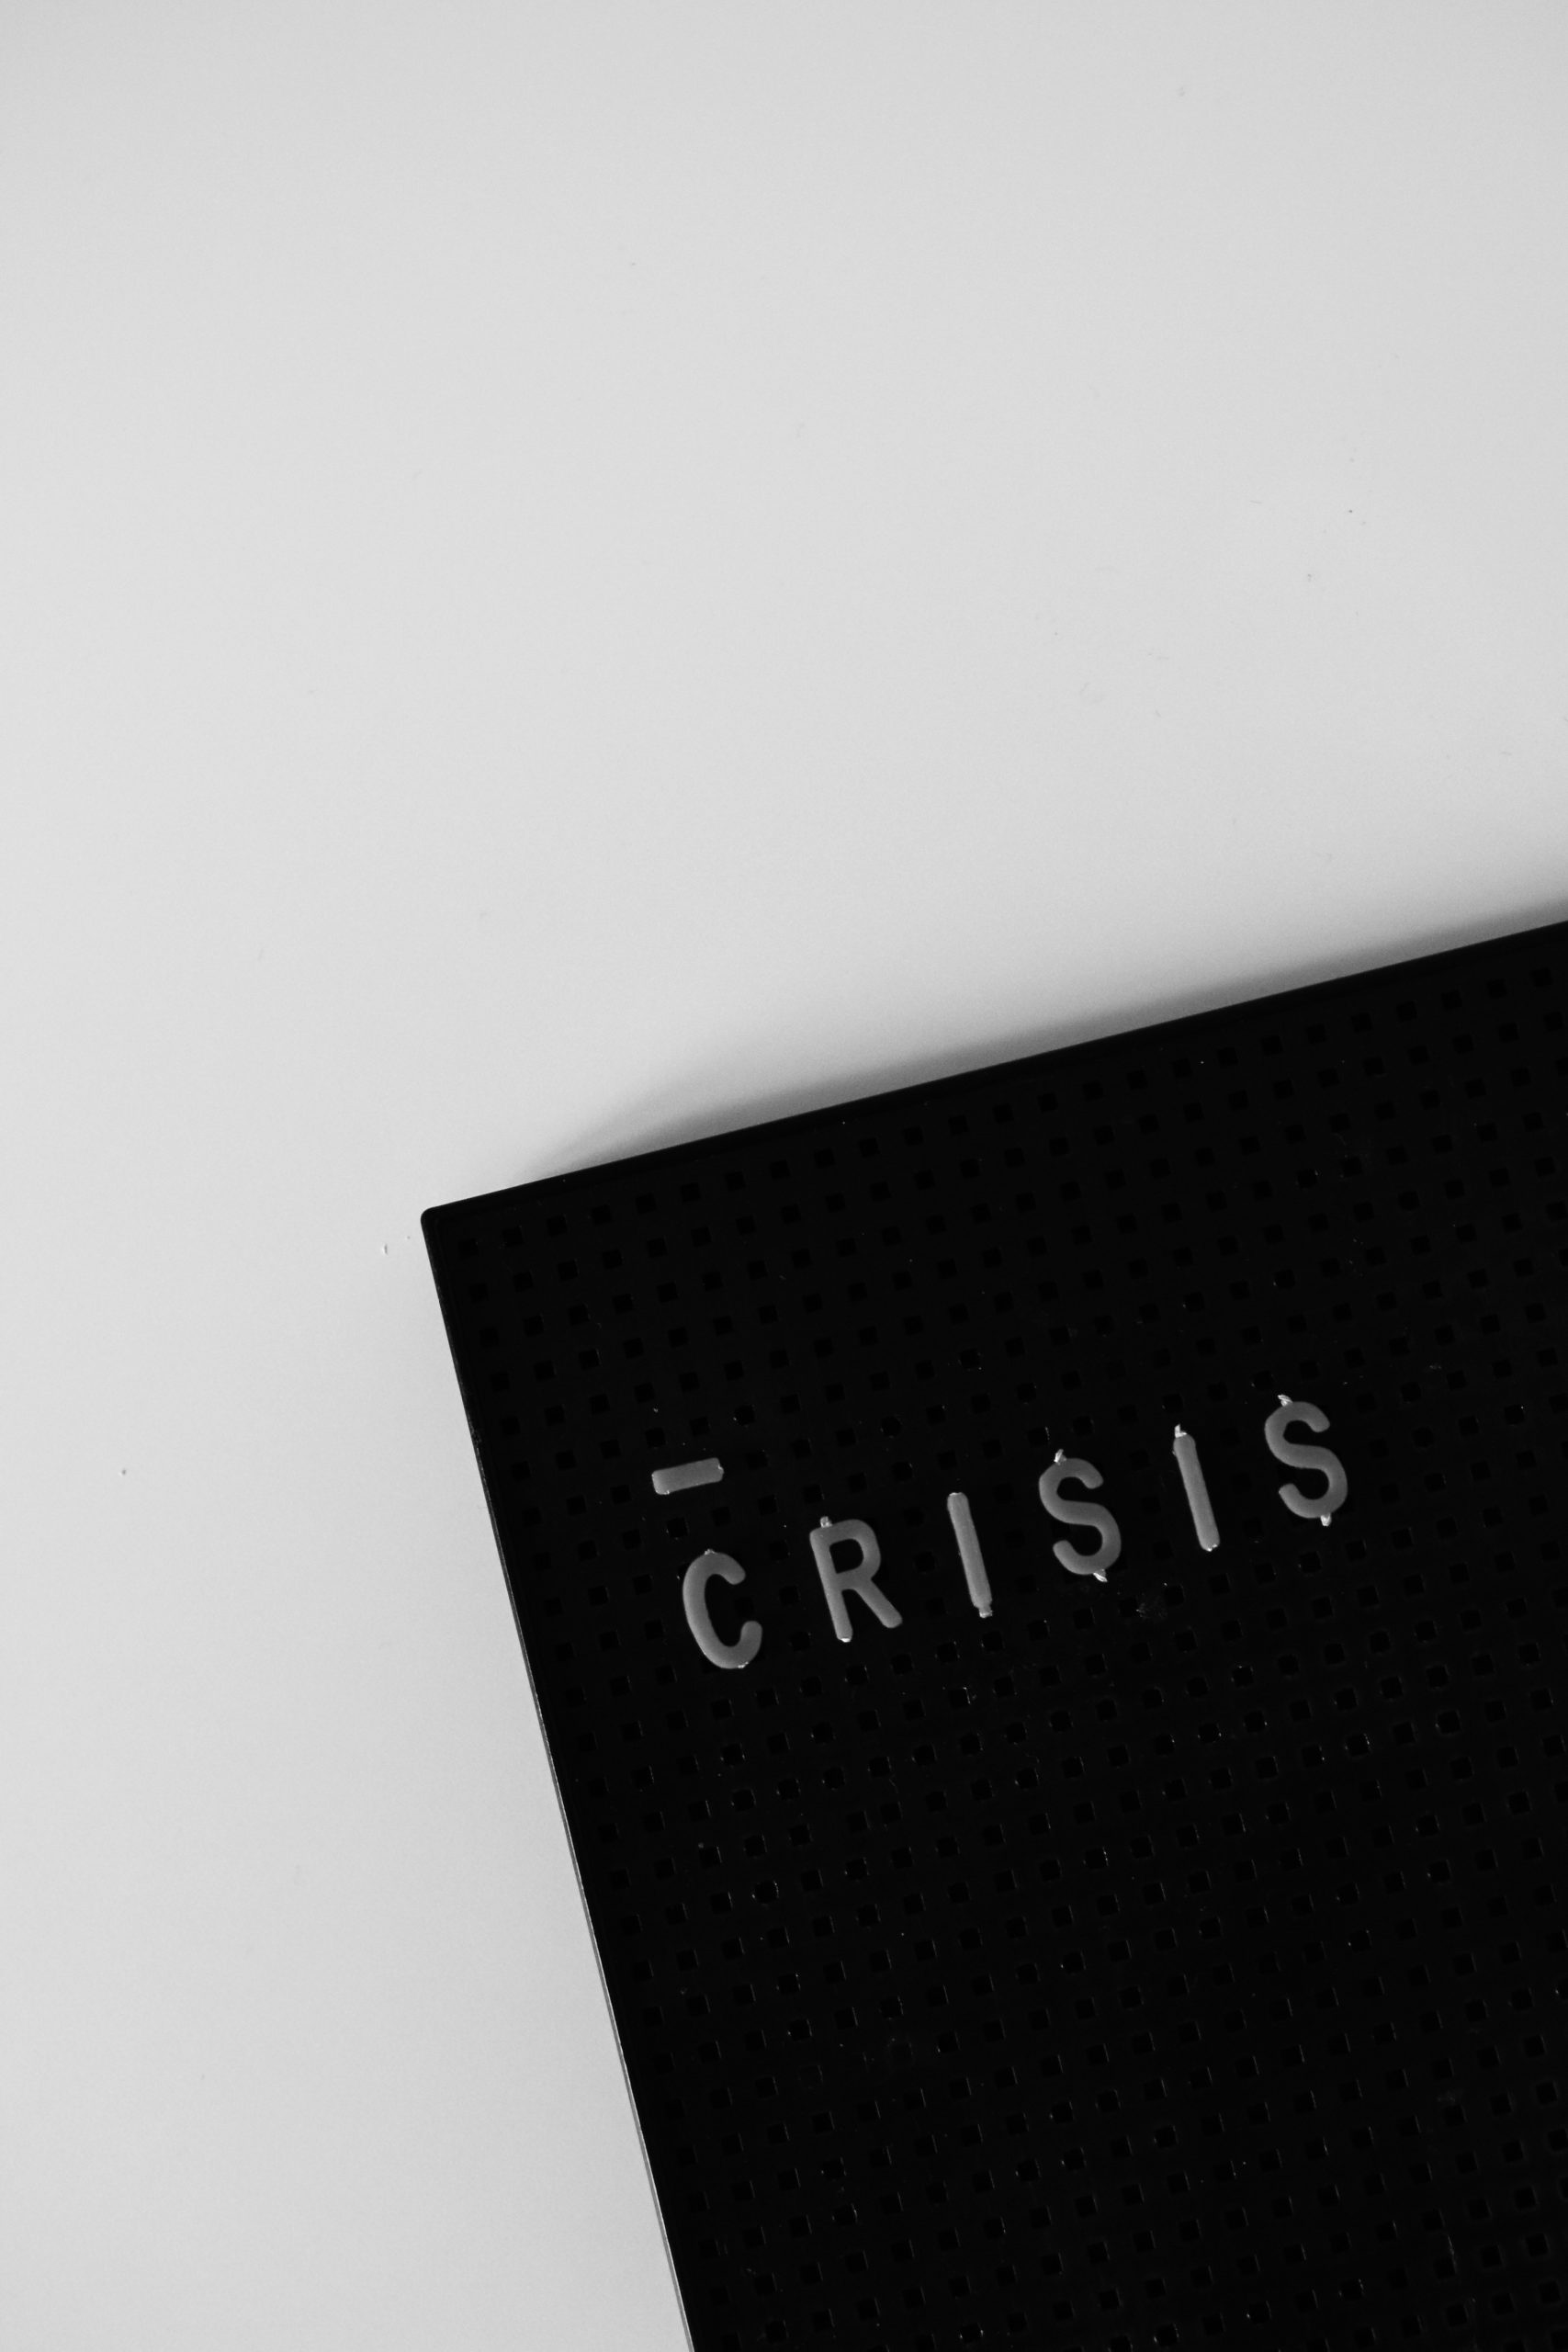 A black pegboard with the word "CRI$I$" written on it in white letters, creatively symbolizing entrepreneurial challenges. The pegboard is placed on a white background, offering a poignant message for aspiring female businesses.